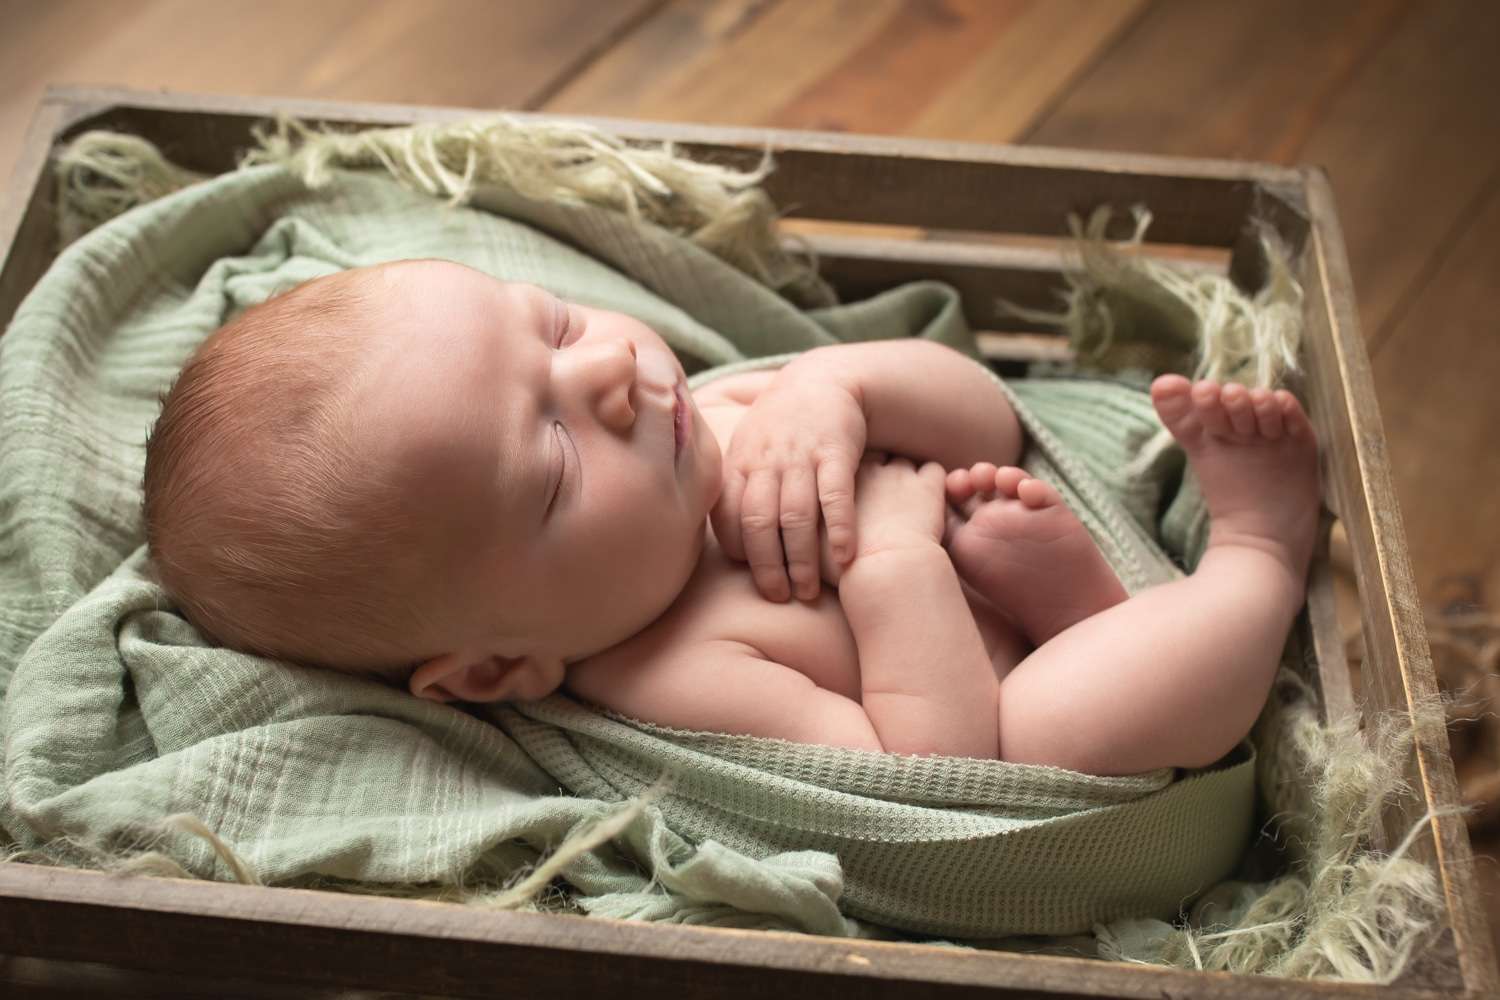 newborn photographer in rochester ny captures newborn baby boy sleeping in a crate